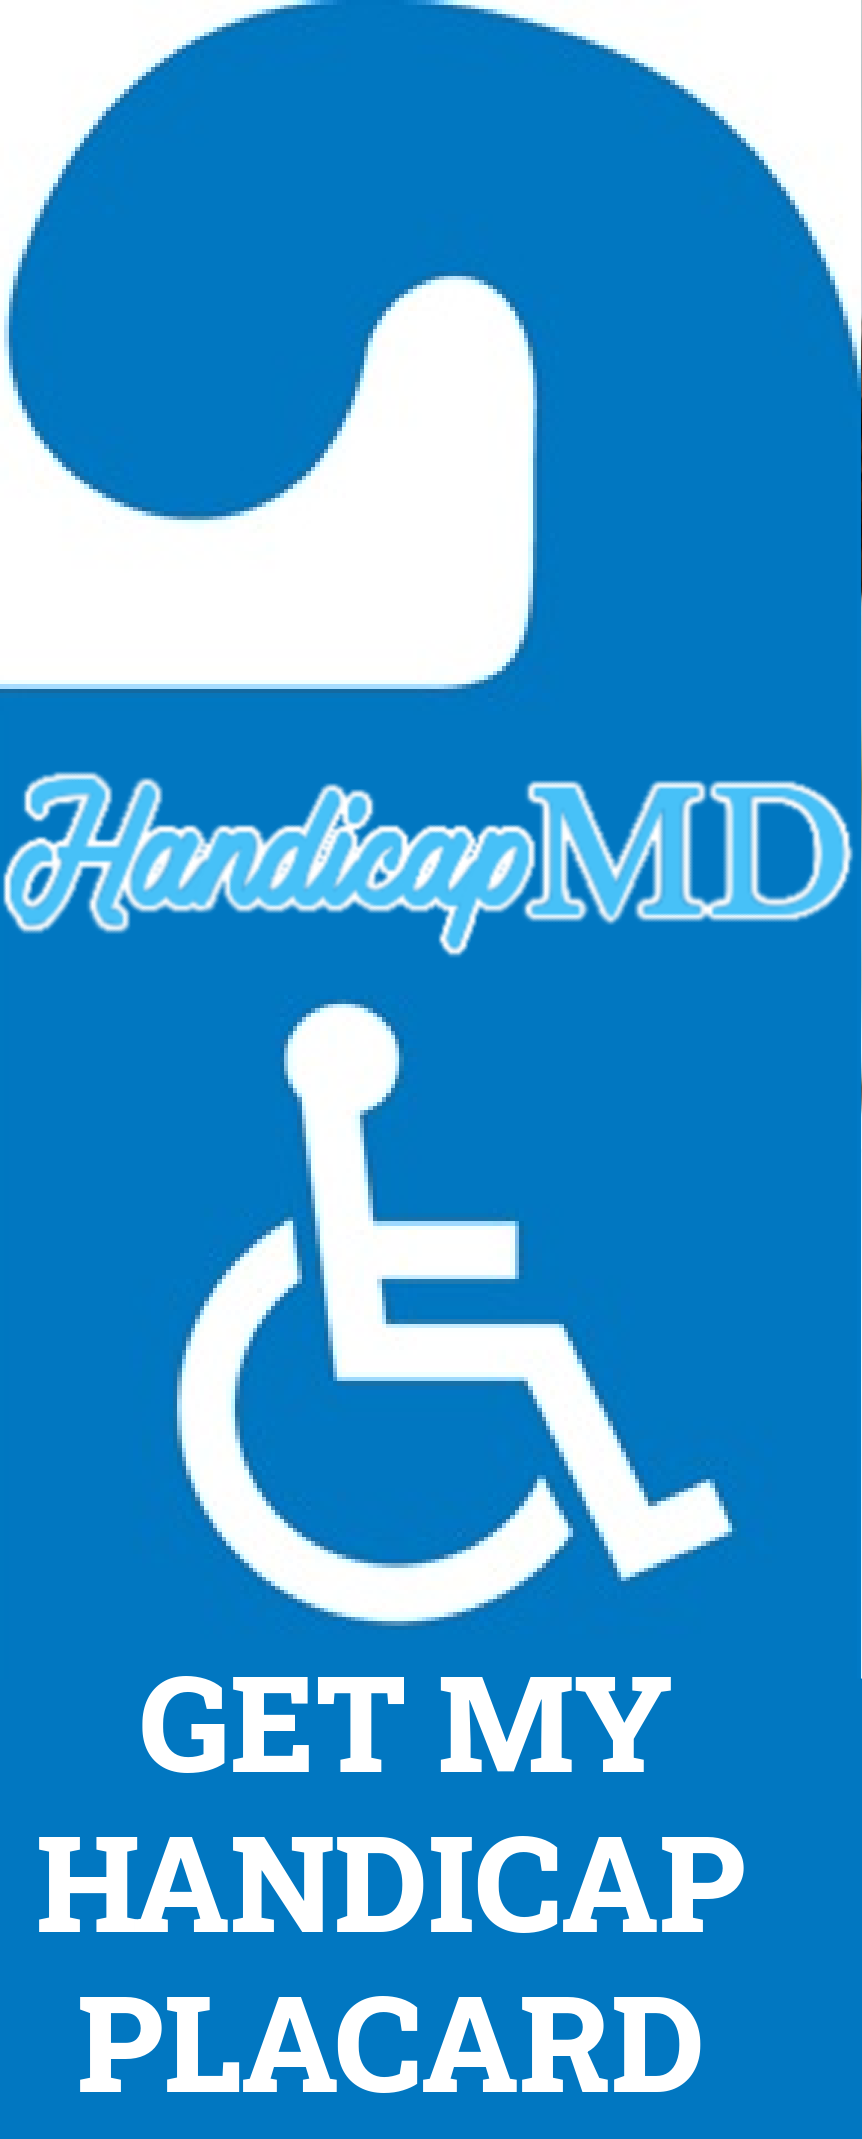 The Impact of Handicap Placard Abuse and How to Report it in Montana